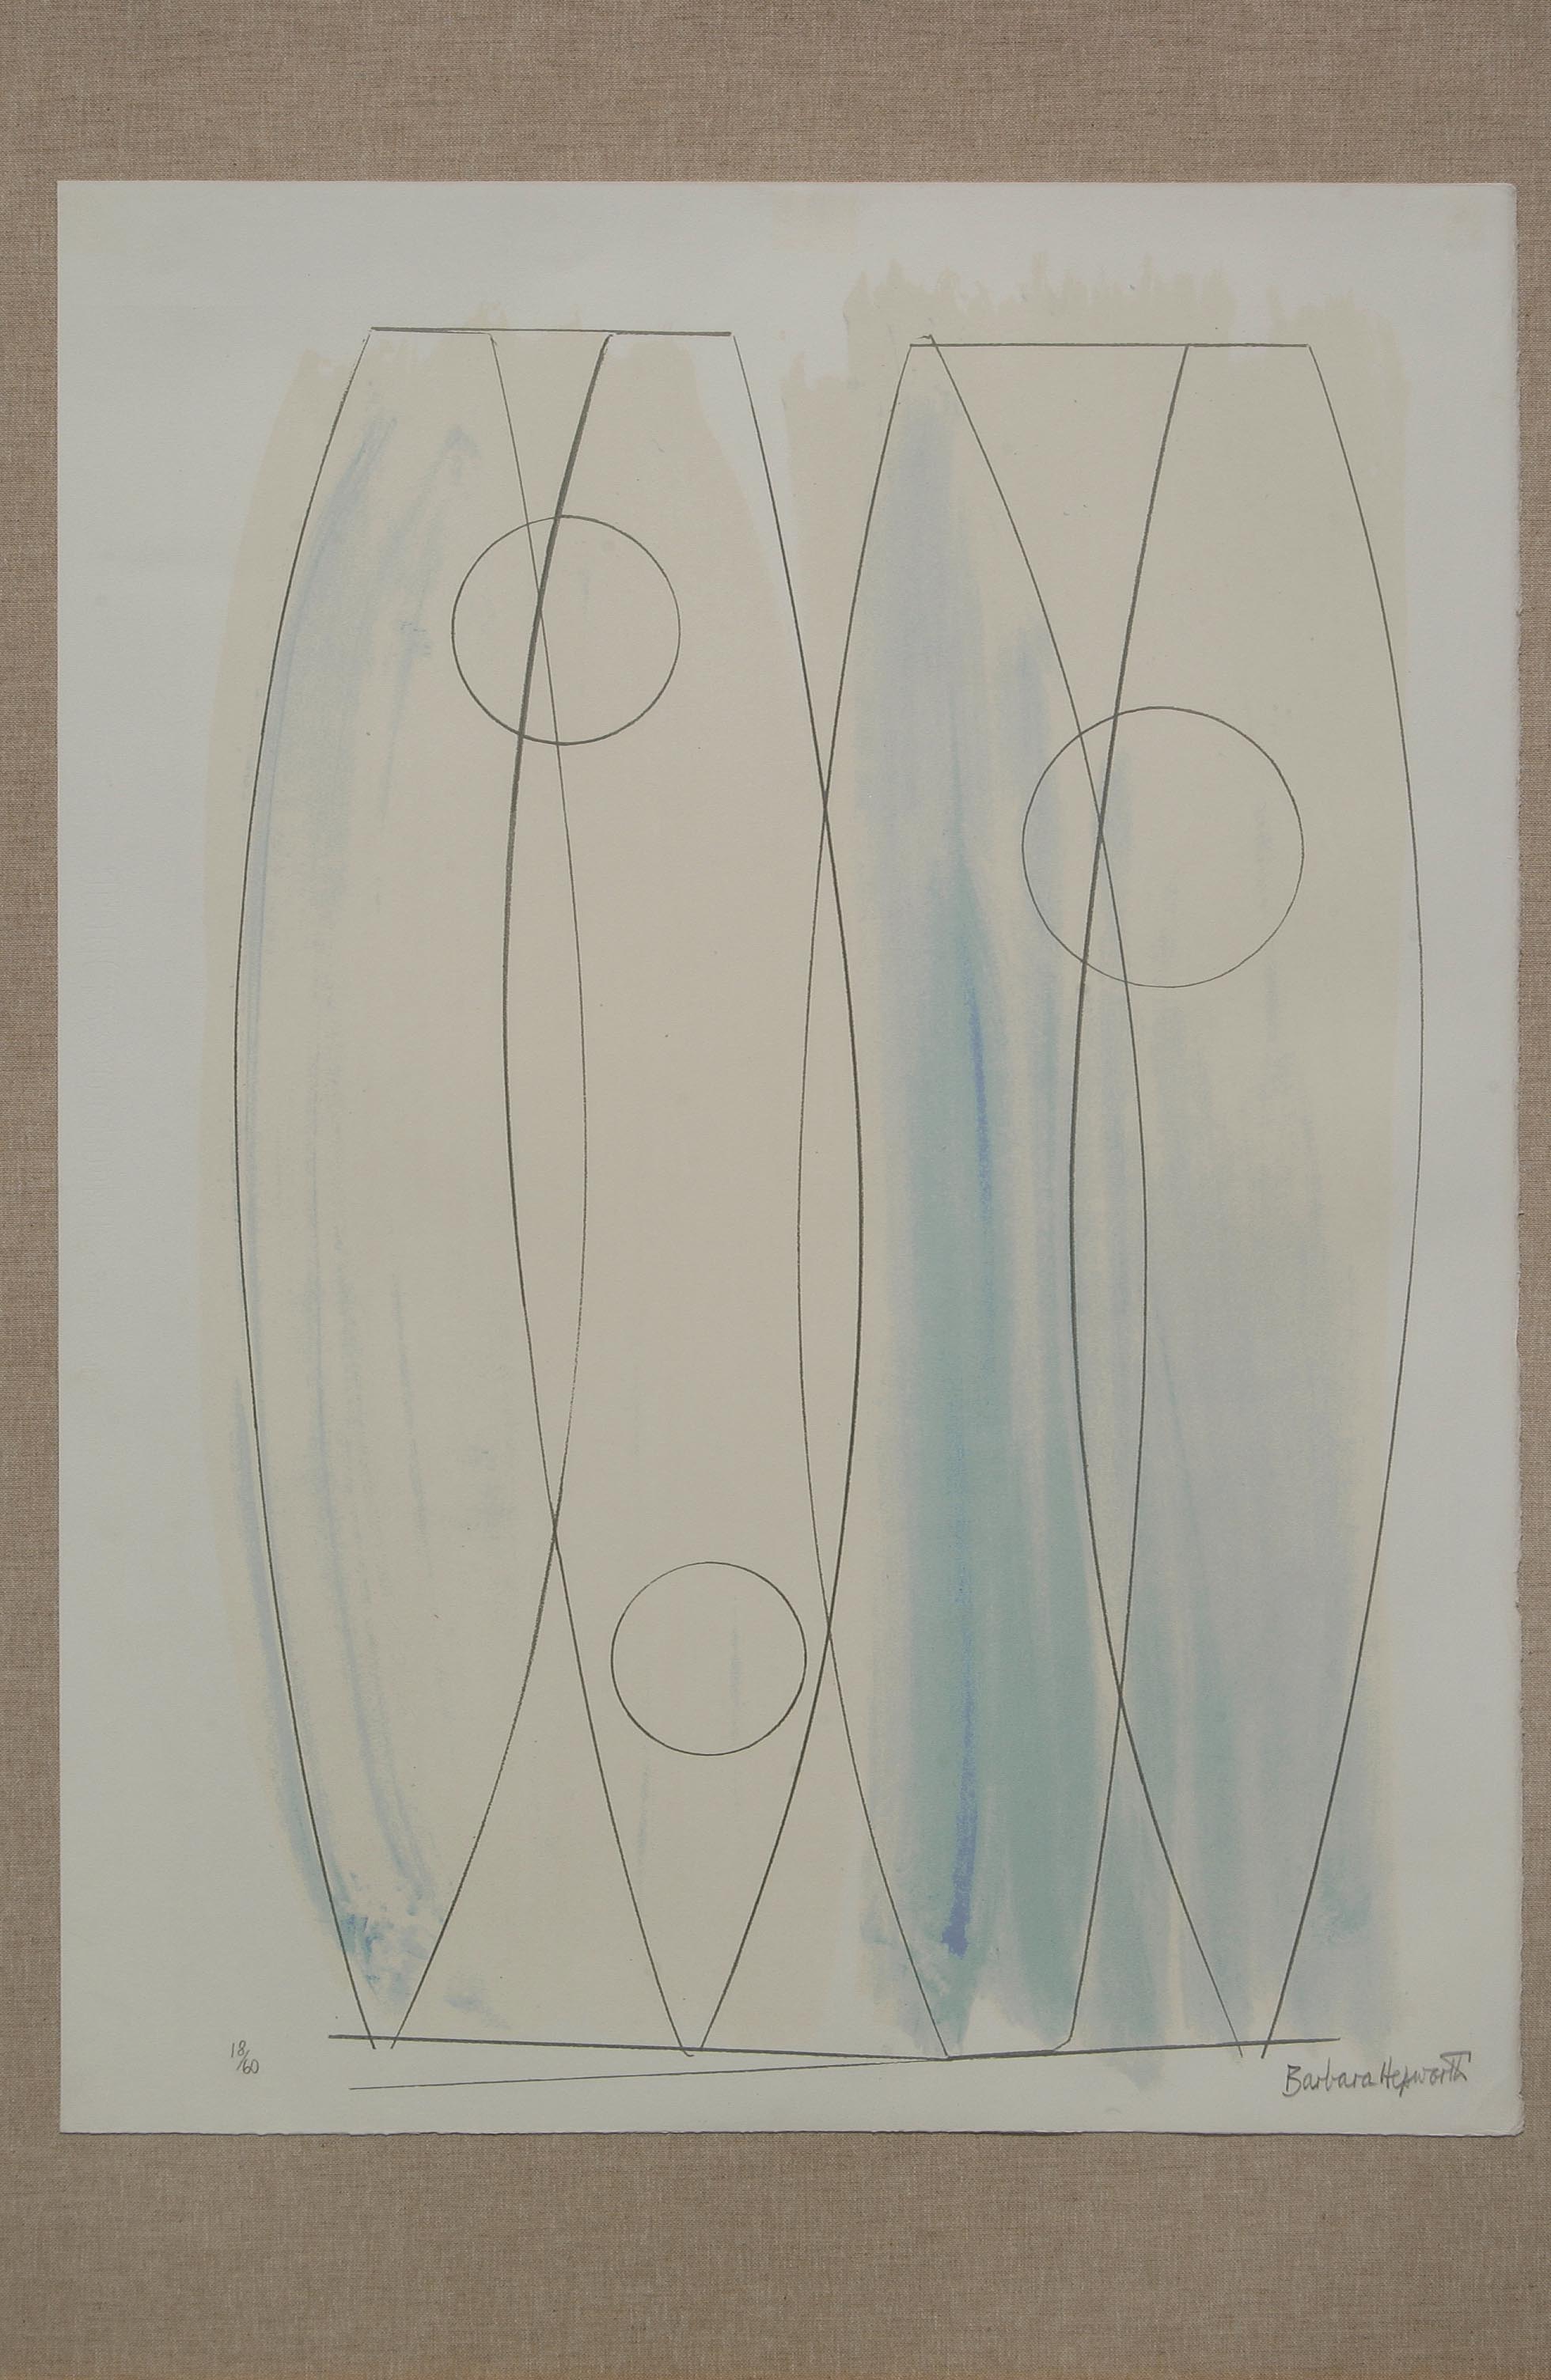 December Forms (from Opposing Forms series) (1975)